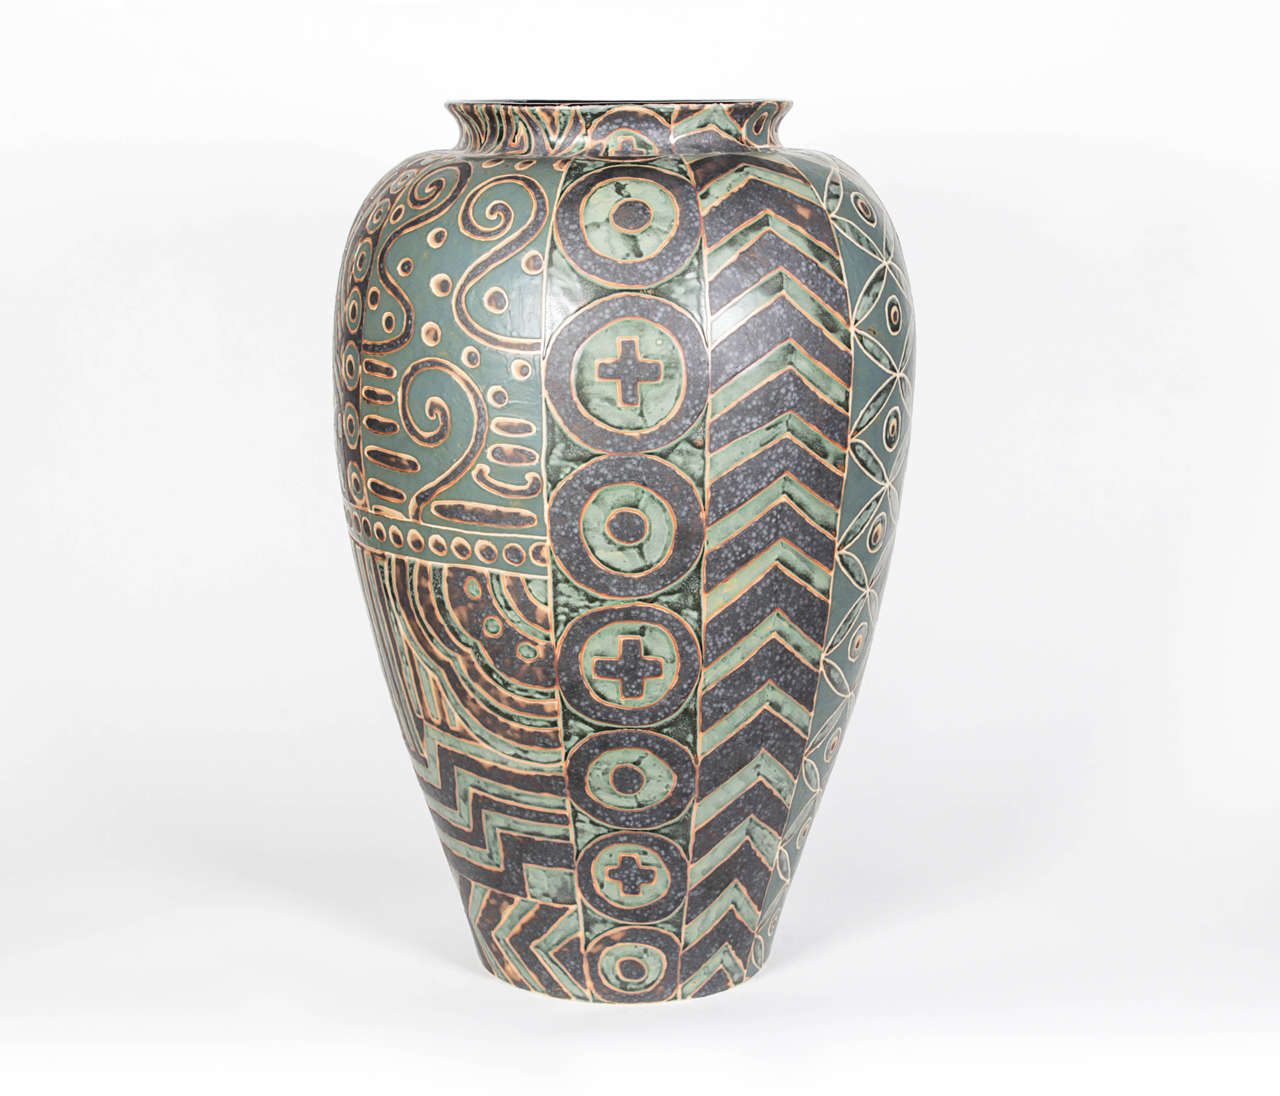 Large Green Thai ceramic vase with tribal pattern. Curated and personally selected by Donna Karan for her Urban Zen brand.